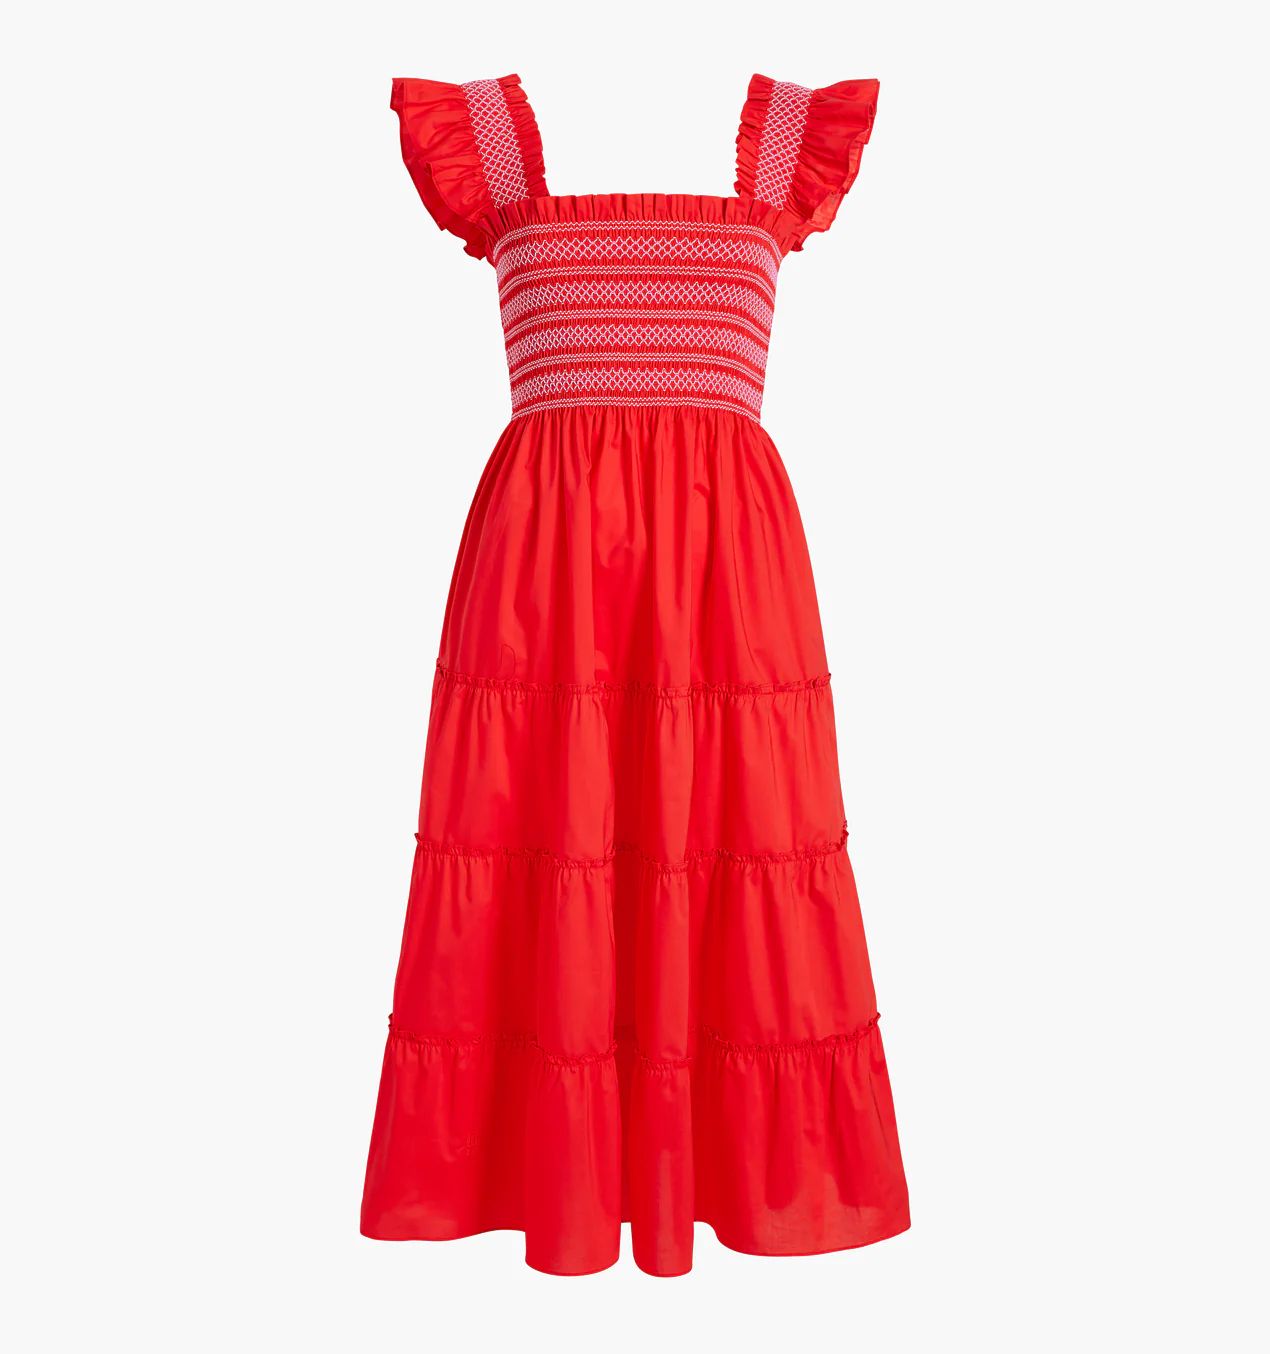 The Ellie Nap Dress - Poppy Red Cotton | Hill House Home